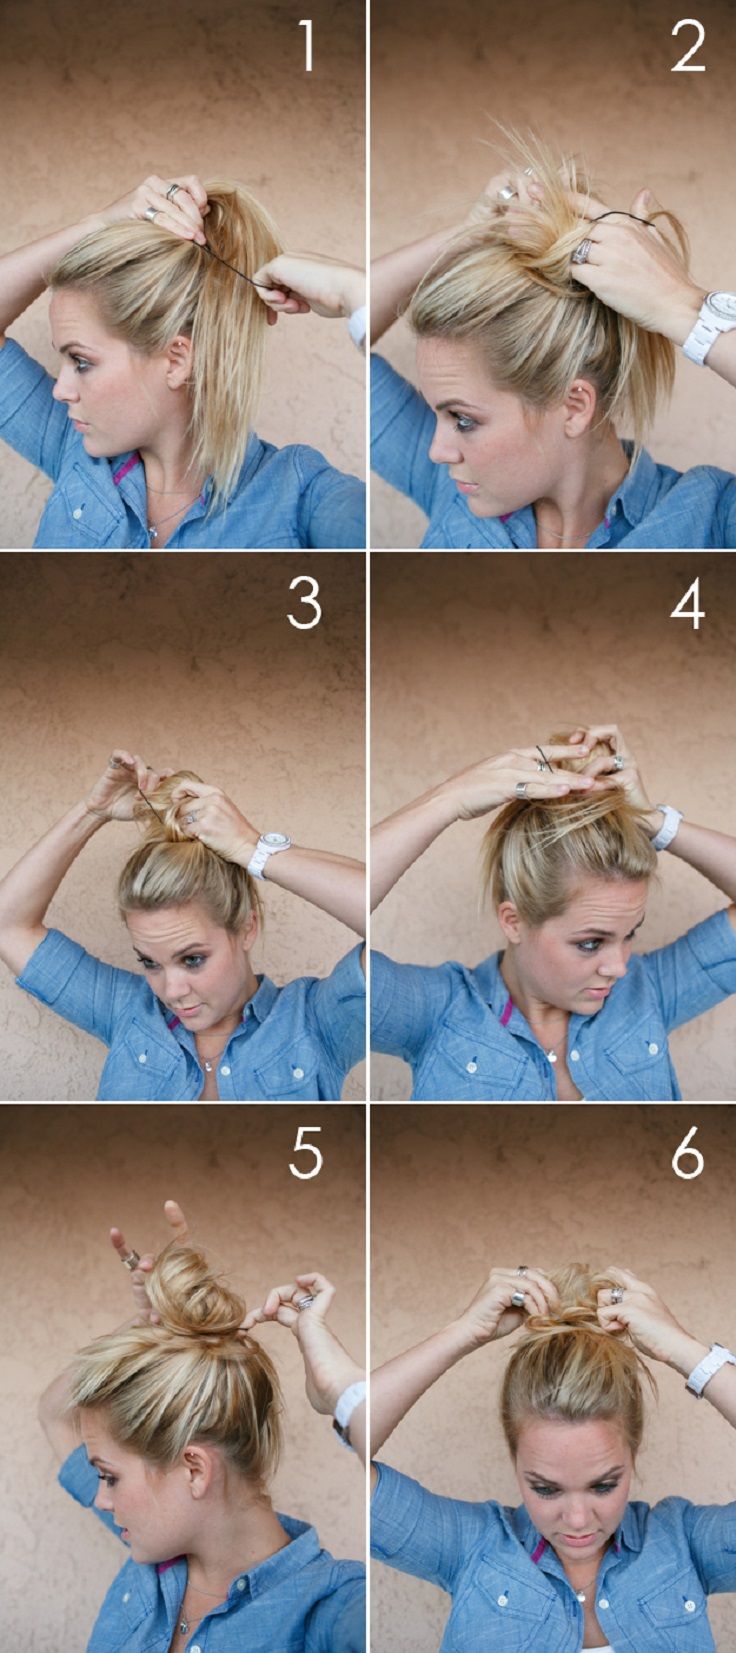 20 Quick Hair Tutorials to Make an Easy Morning - Pretty ...